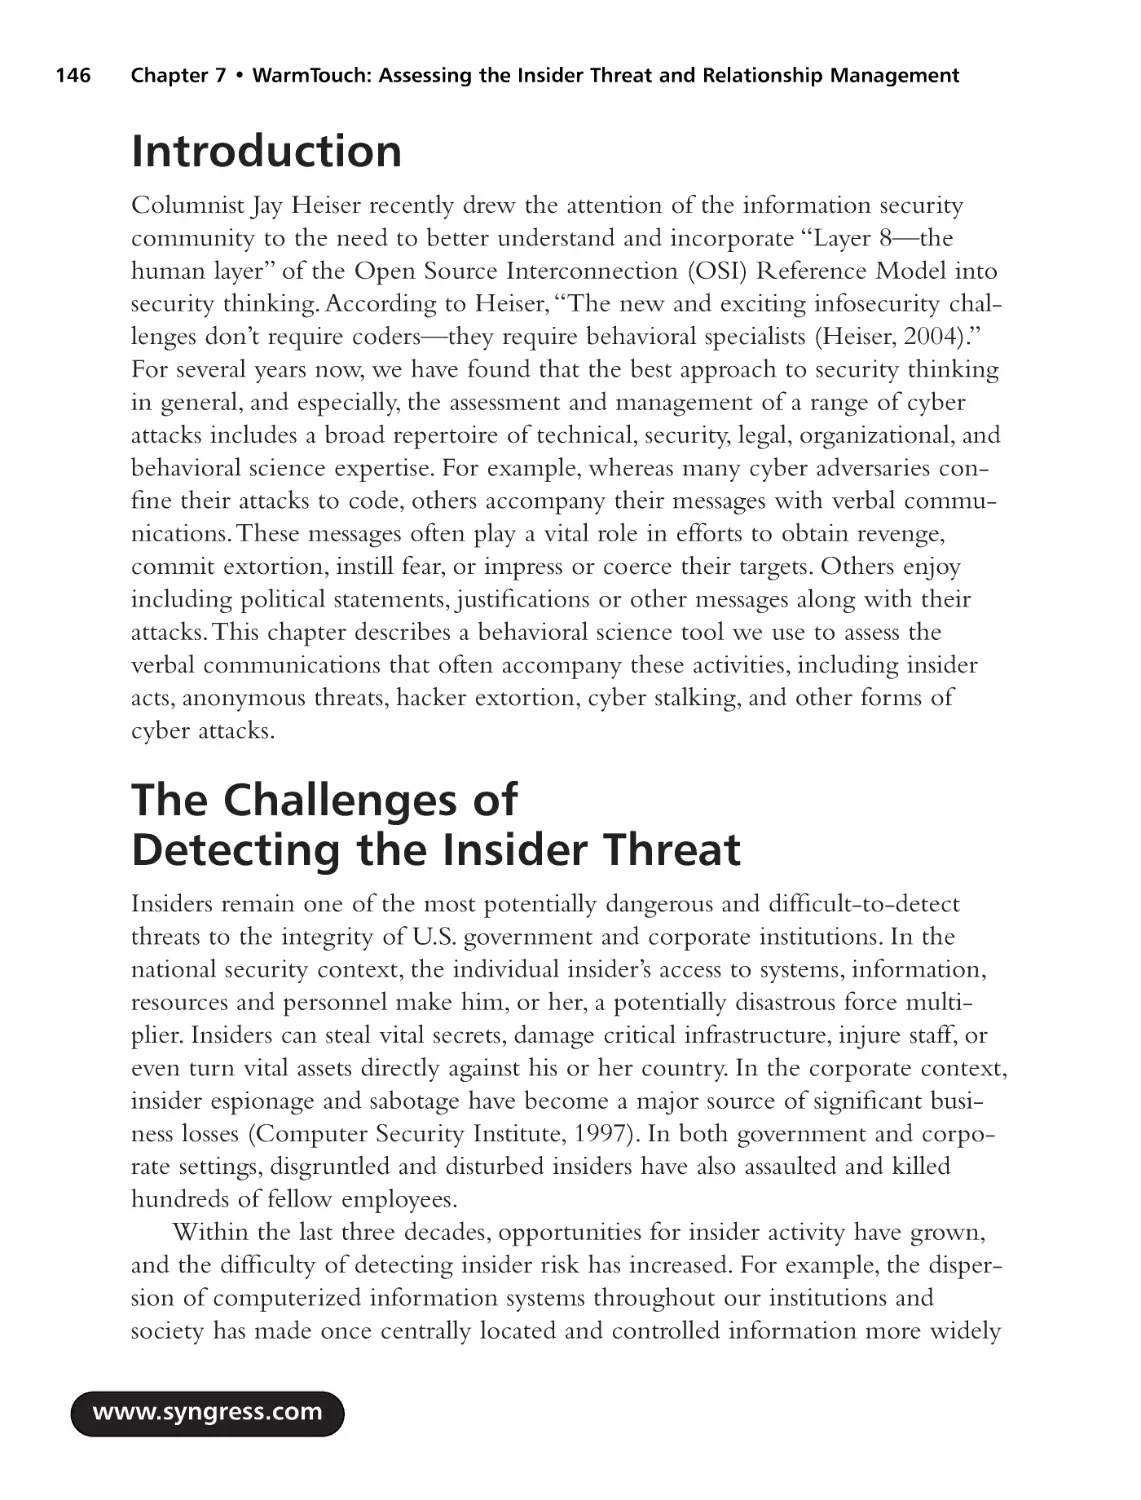 Introduction
The Challenges of Detecting the Insider Threat